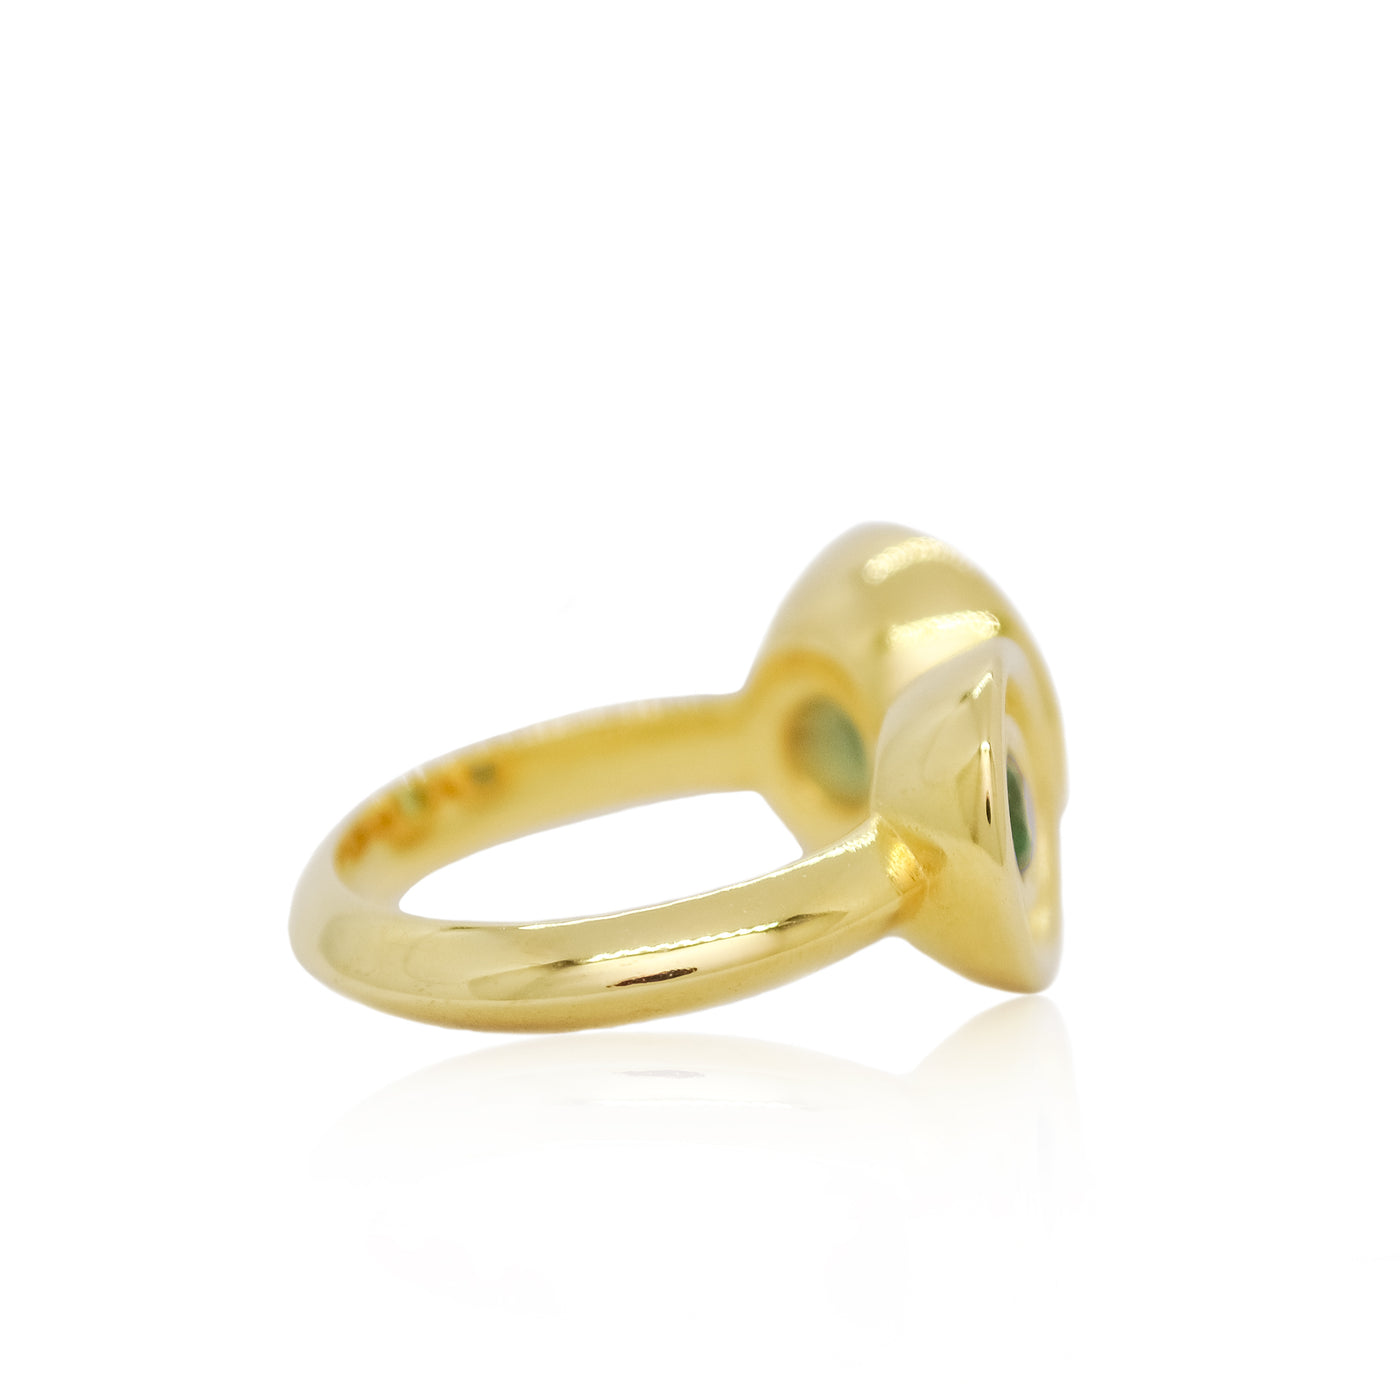 Gold cocktail ring with prasiolite and tourmaline from Atelier ORMAN